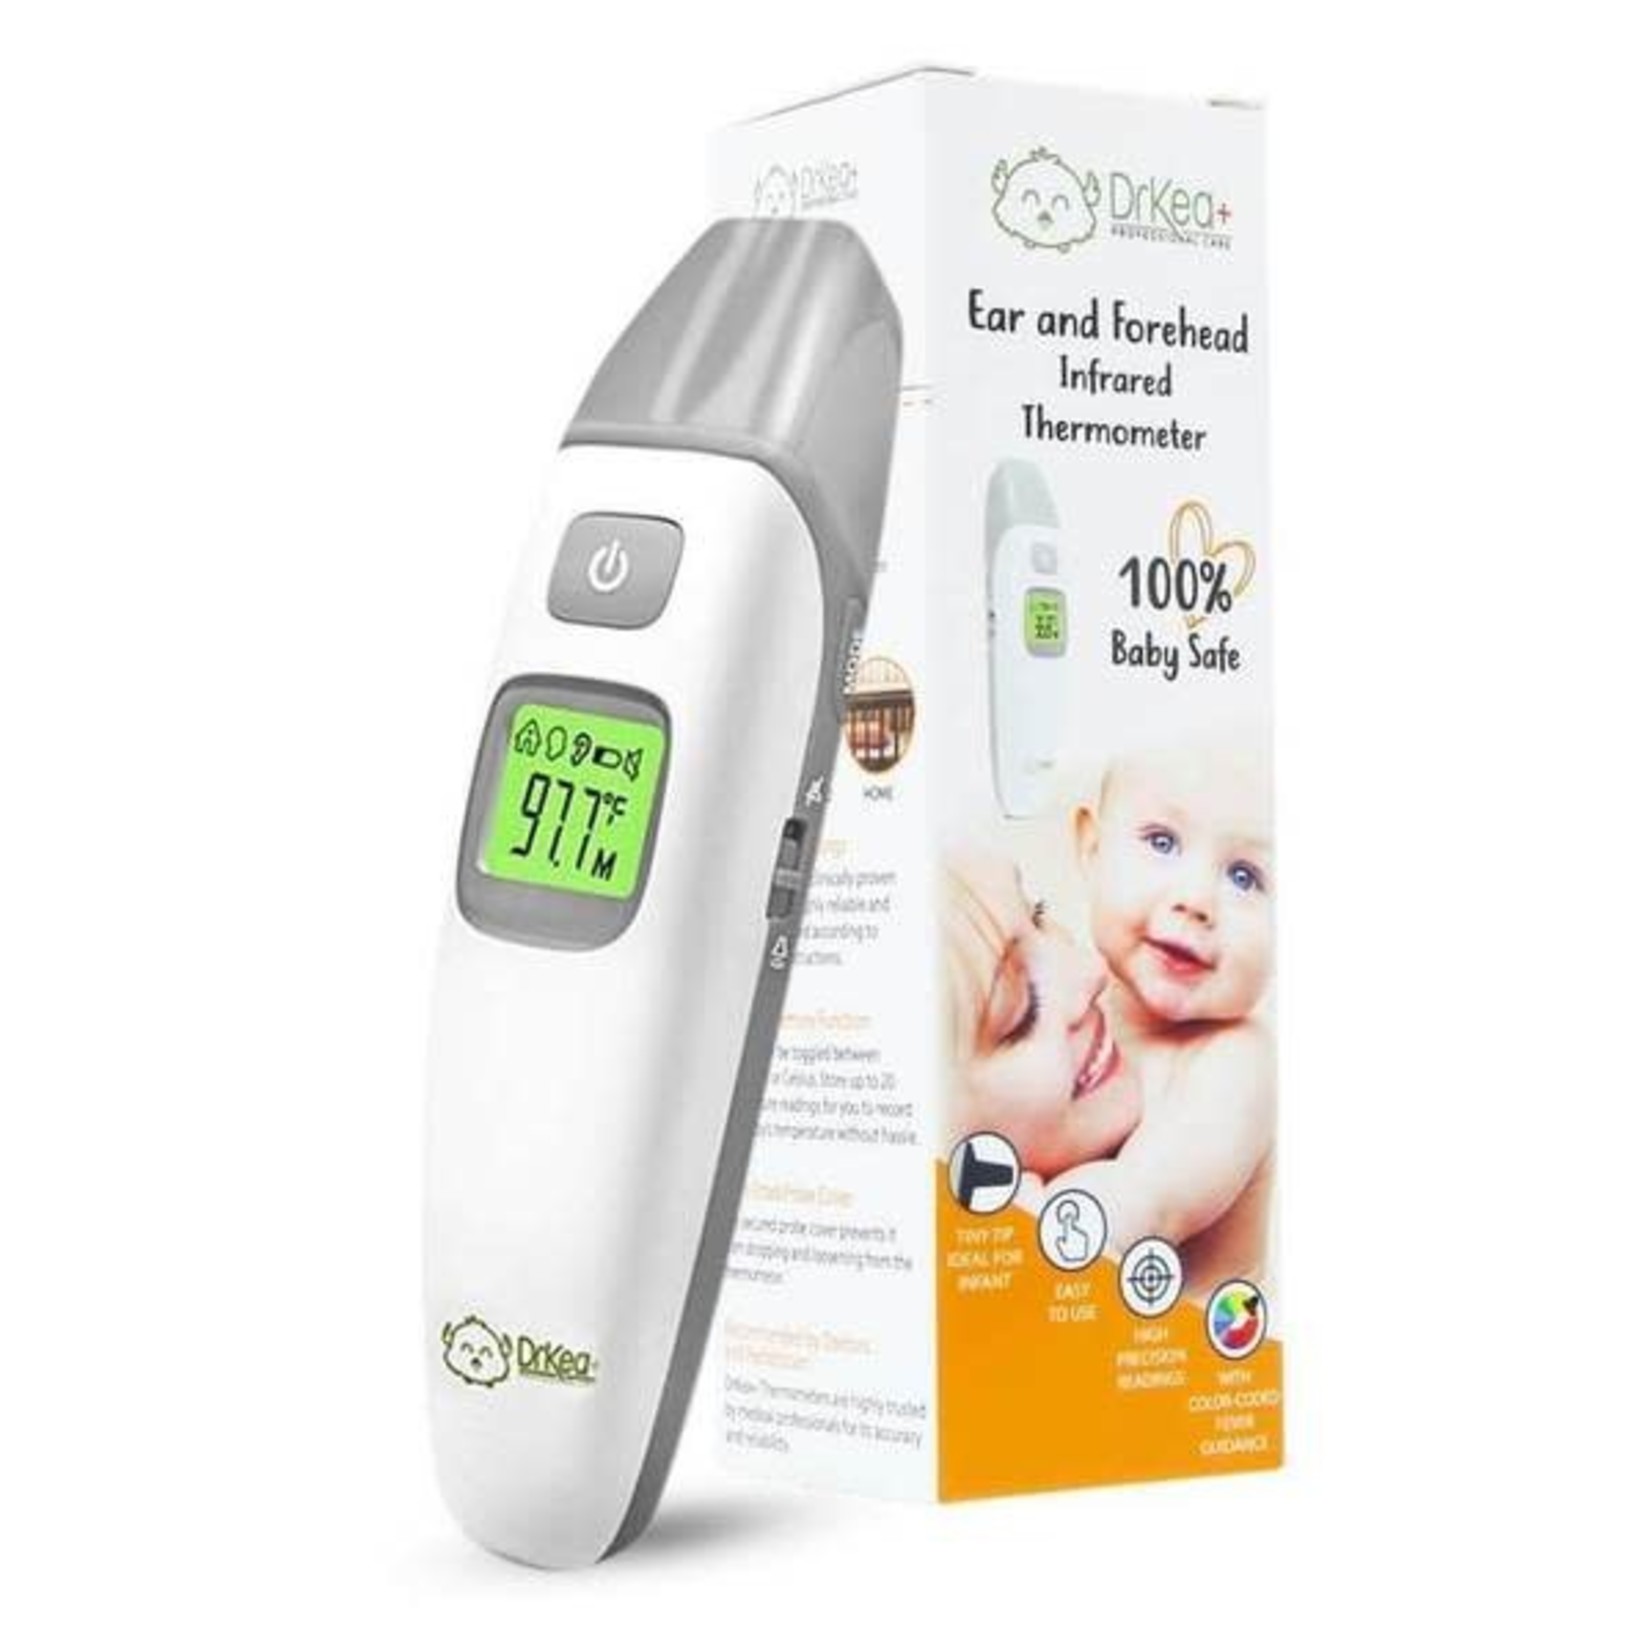 Baby Ear and Forehead Thermometer